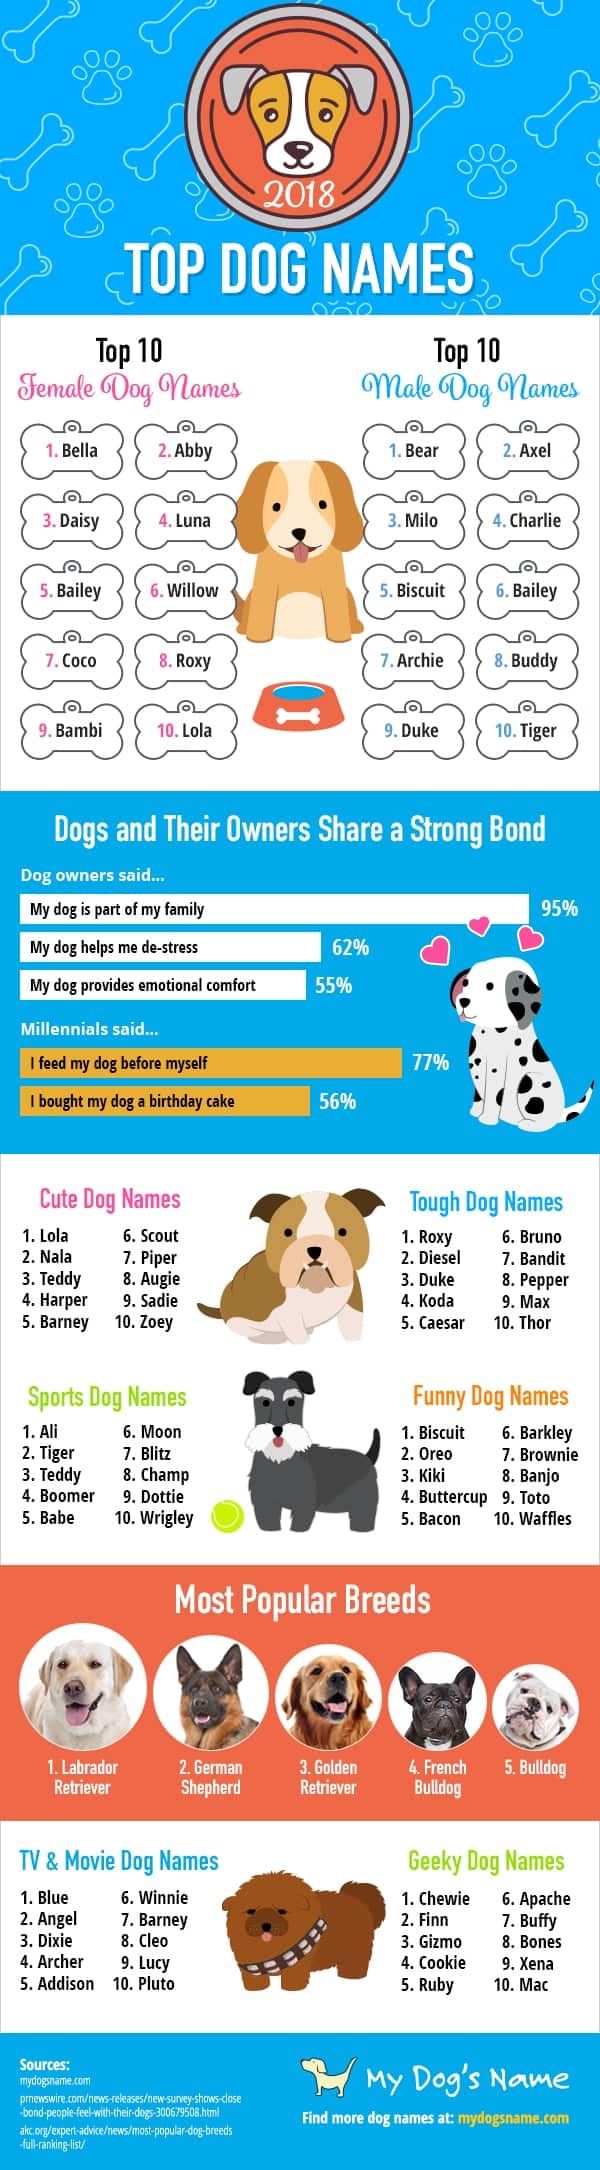 Top dog names for boy & girl dogs [Infographic]